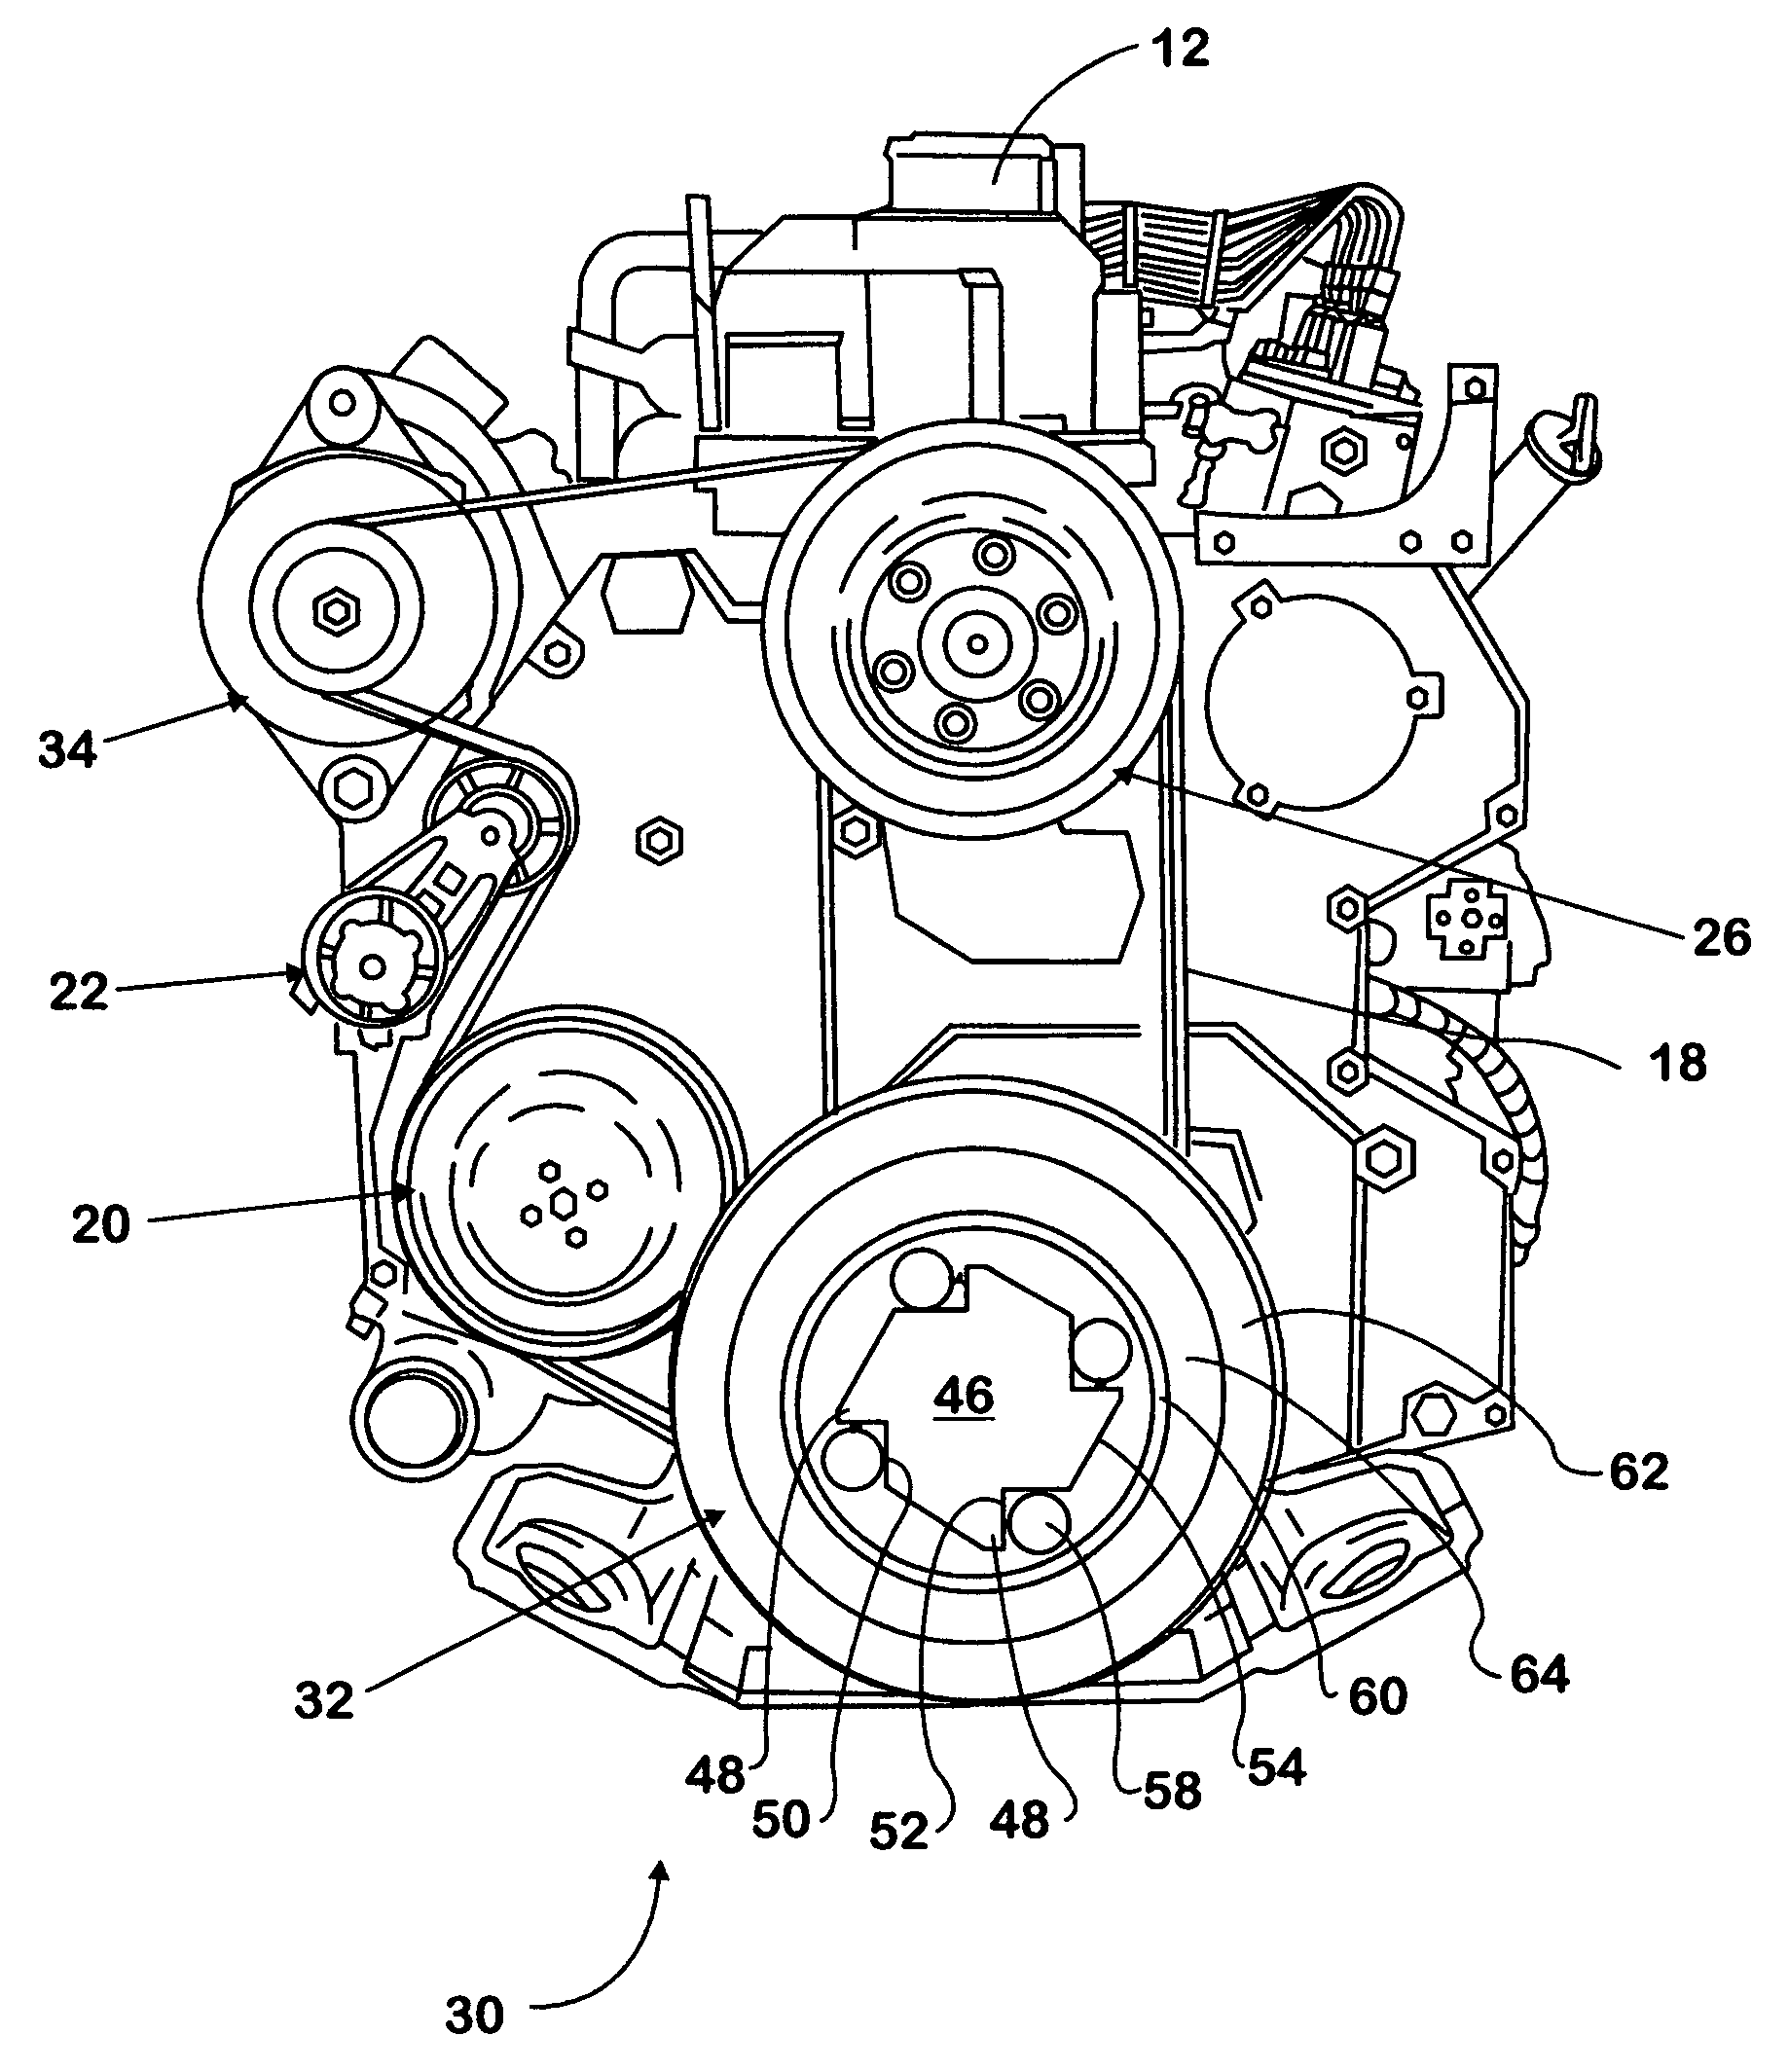 Vehicle electrification using a clutched vibration damper